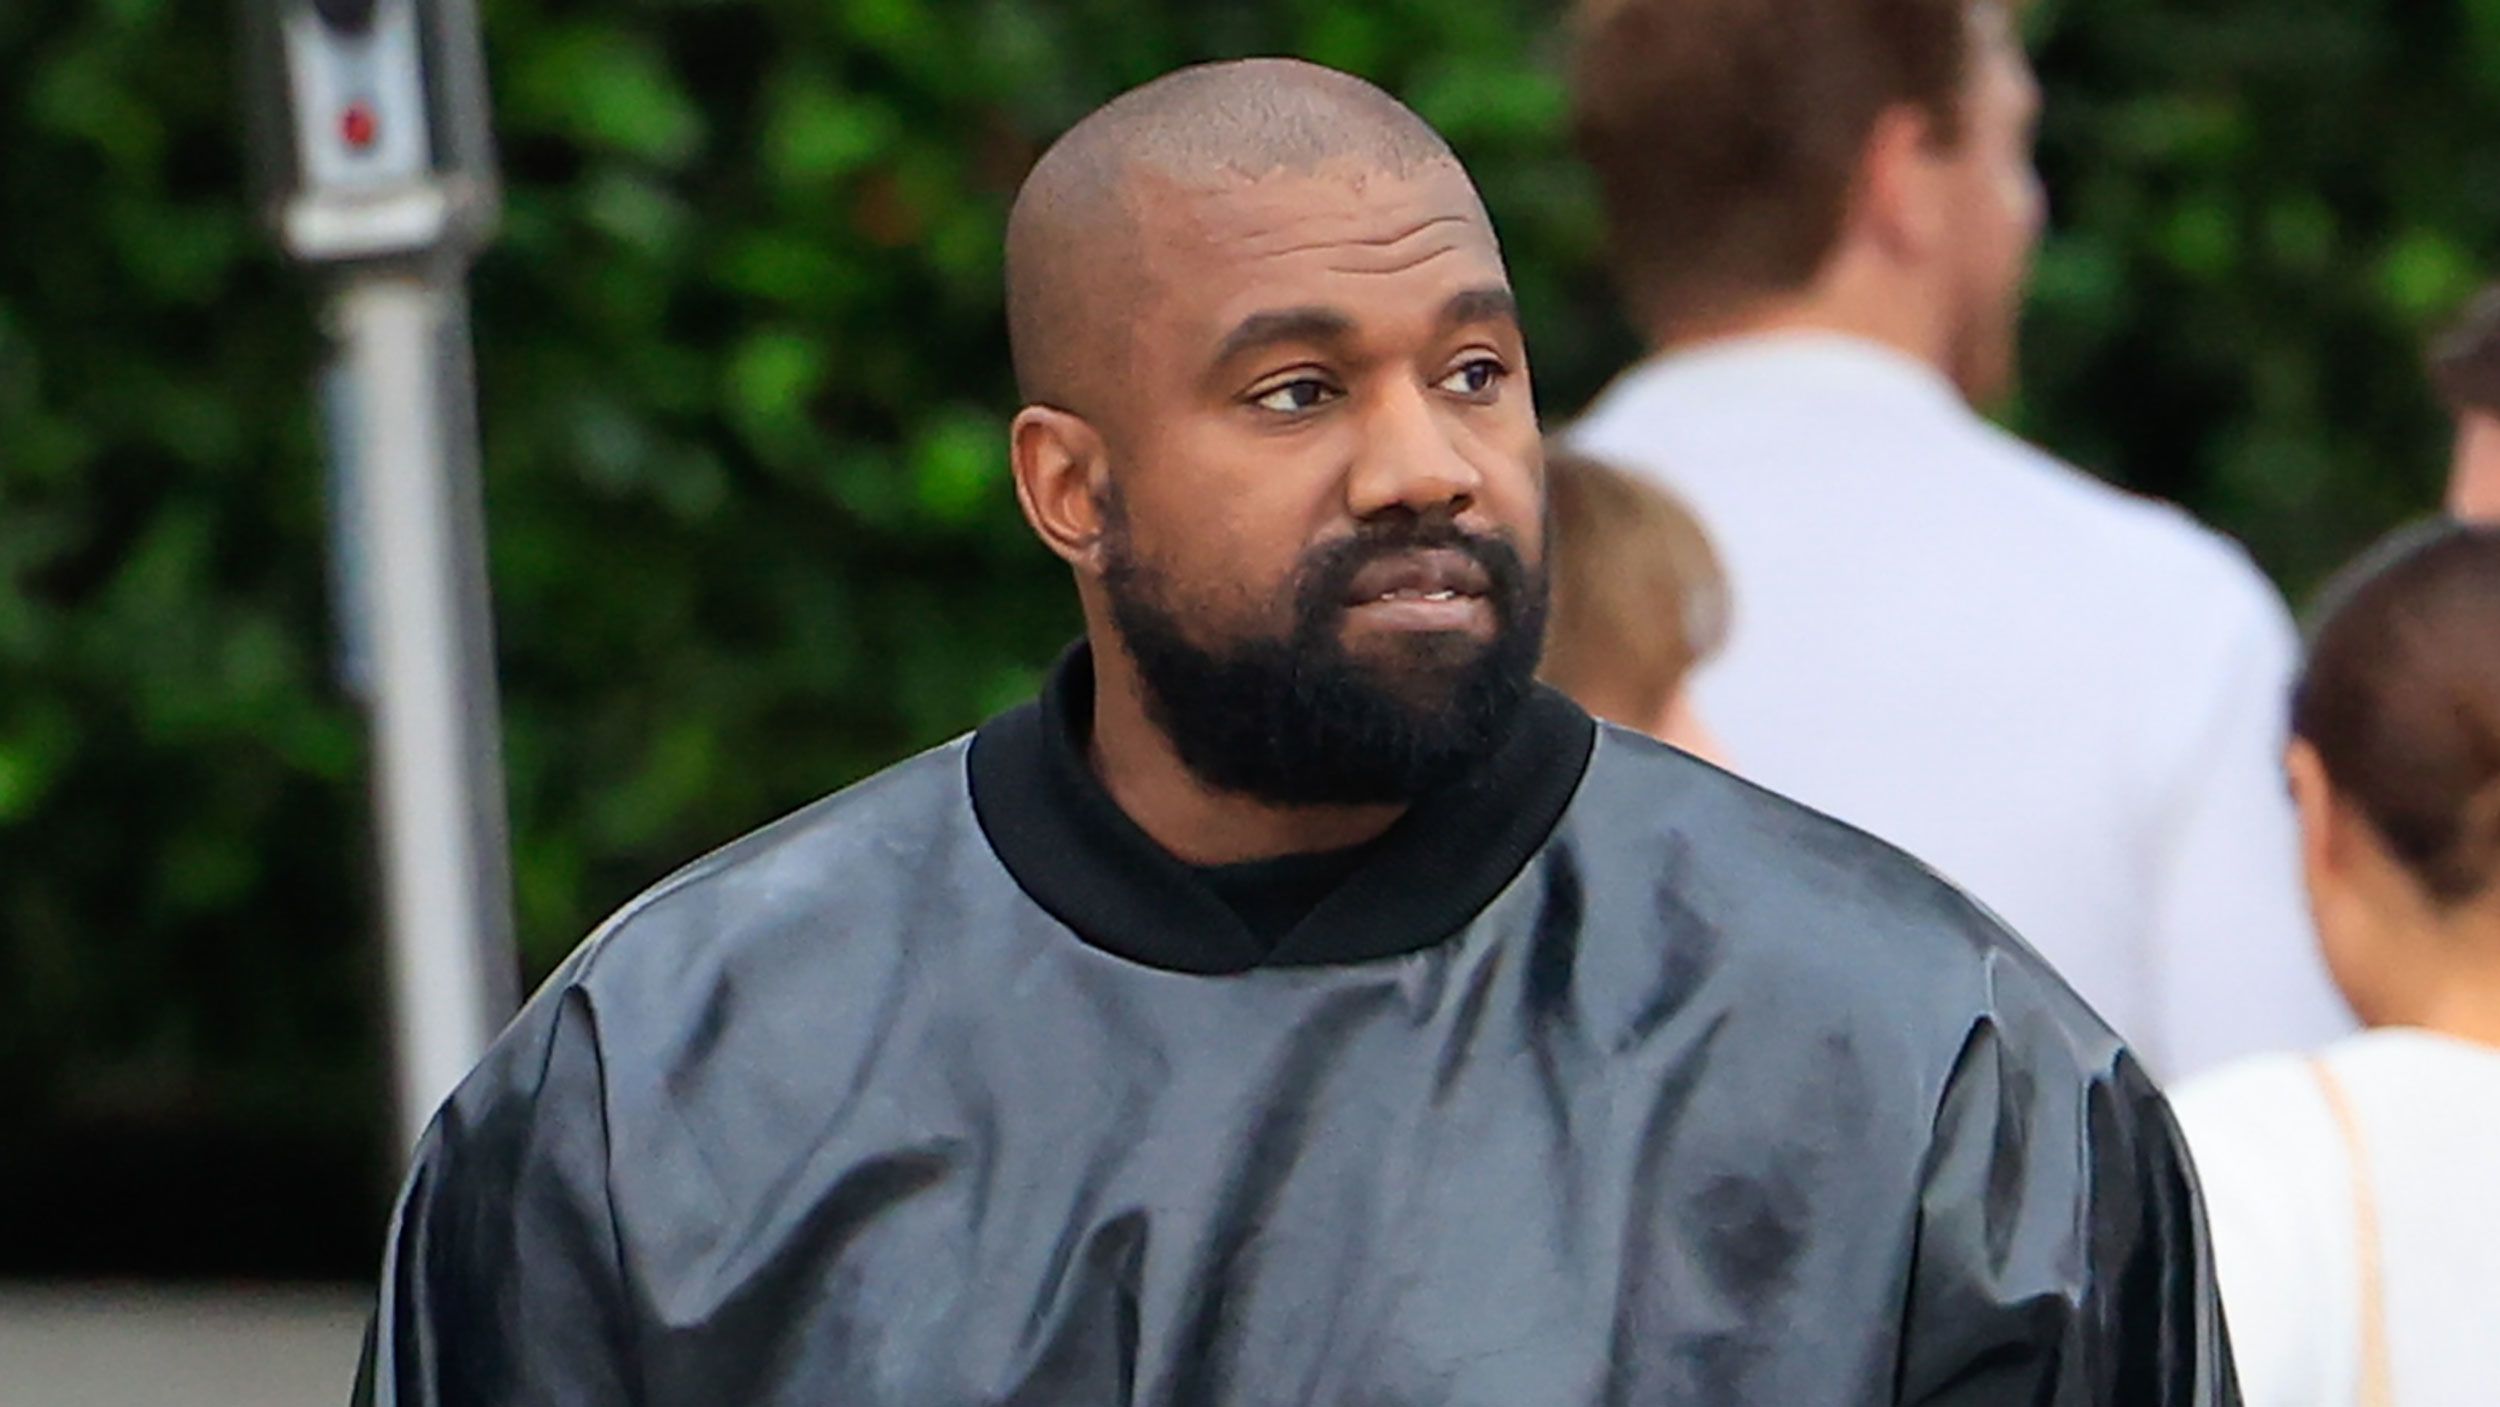 Rapper formerly known as Kanye West is now just Ye